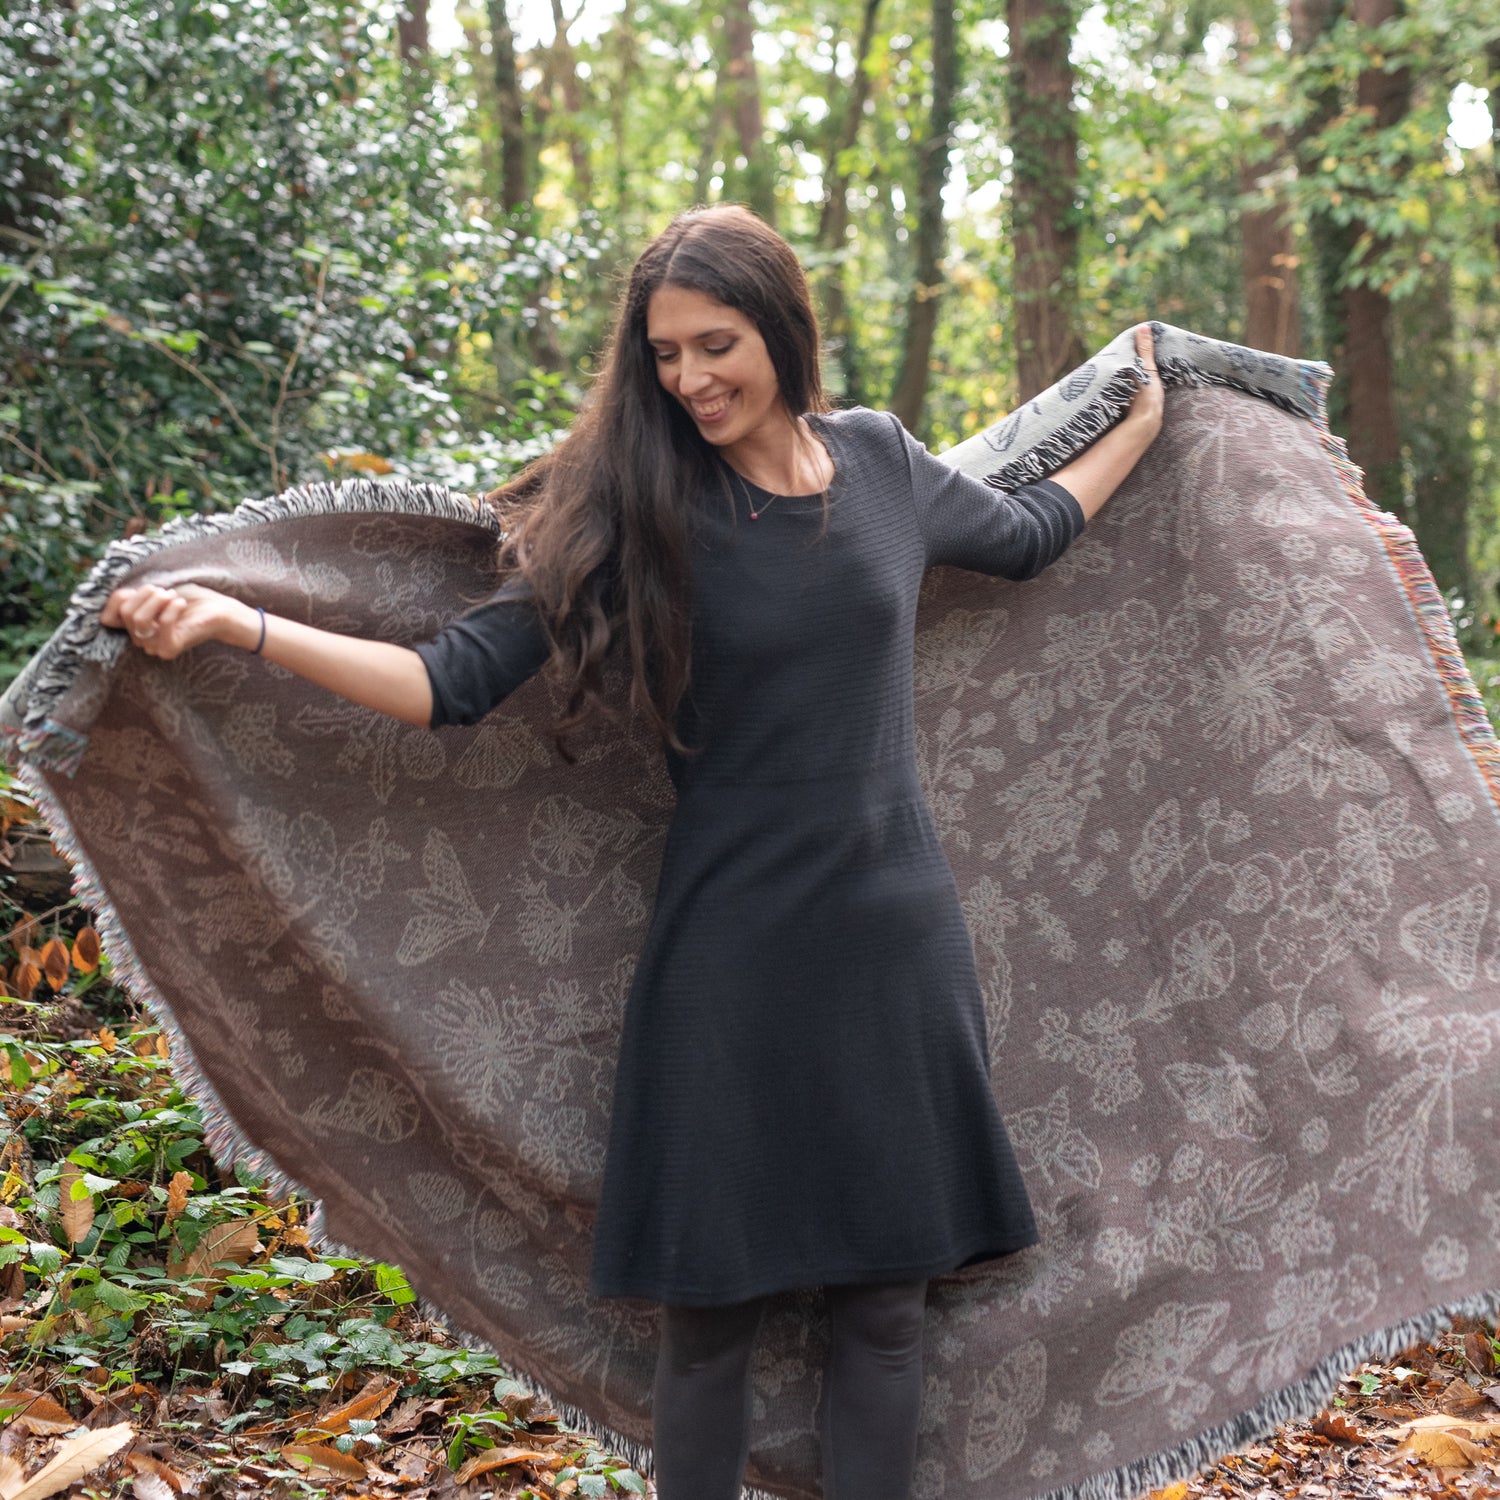 Pretty grey blanket with black pattern of moths, berries, leaves and flowers being held up by happy woman in the woods